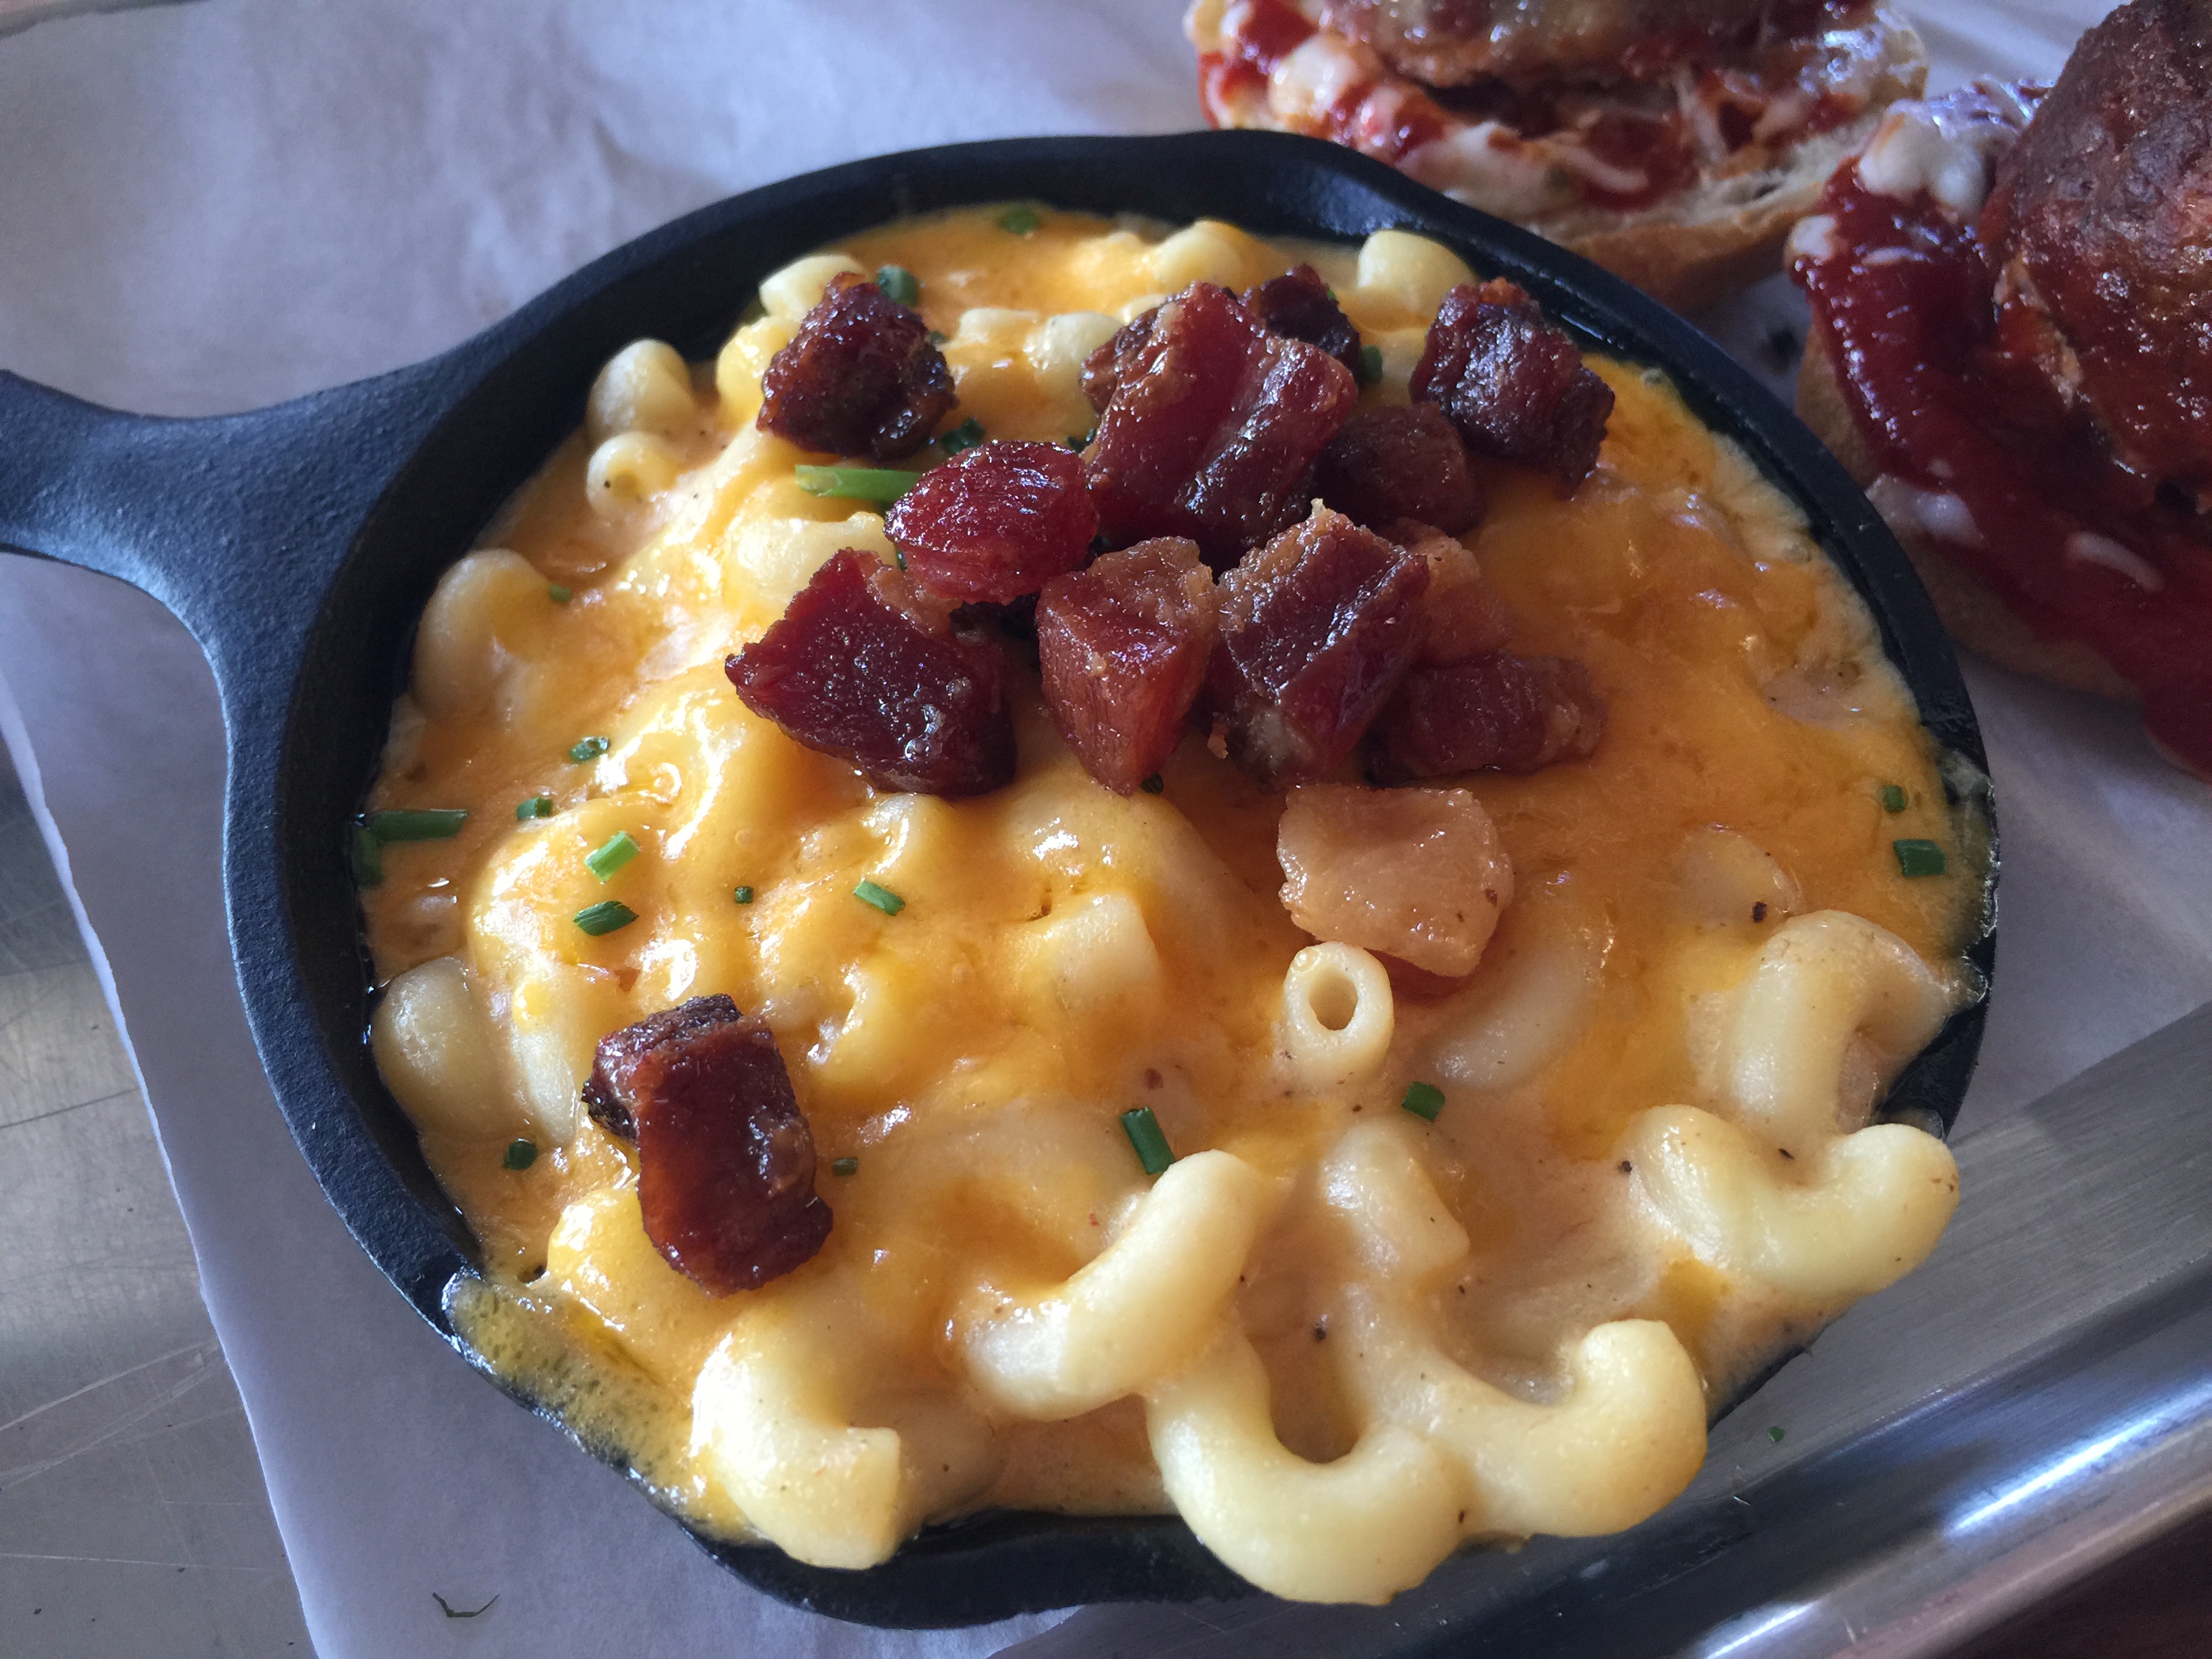 Mac & Cheese with bacon bites